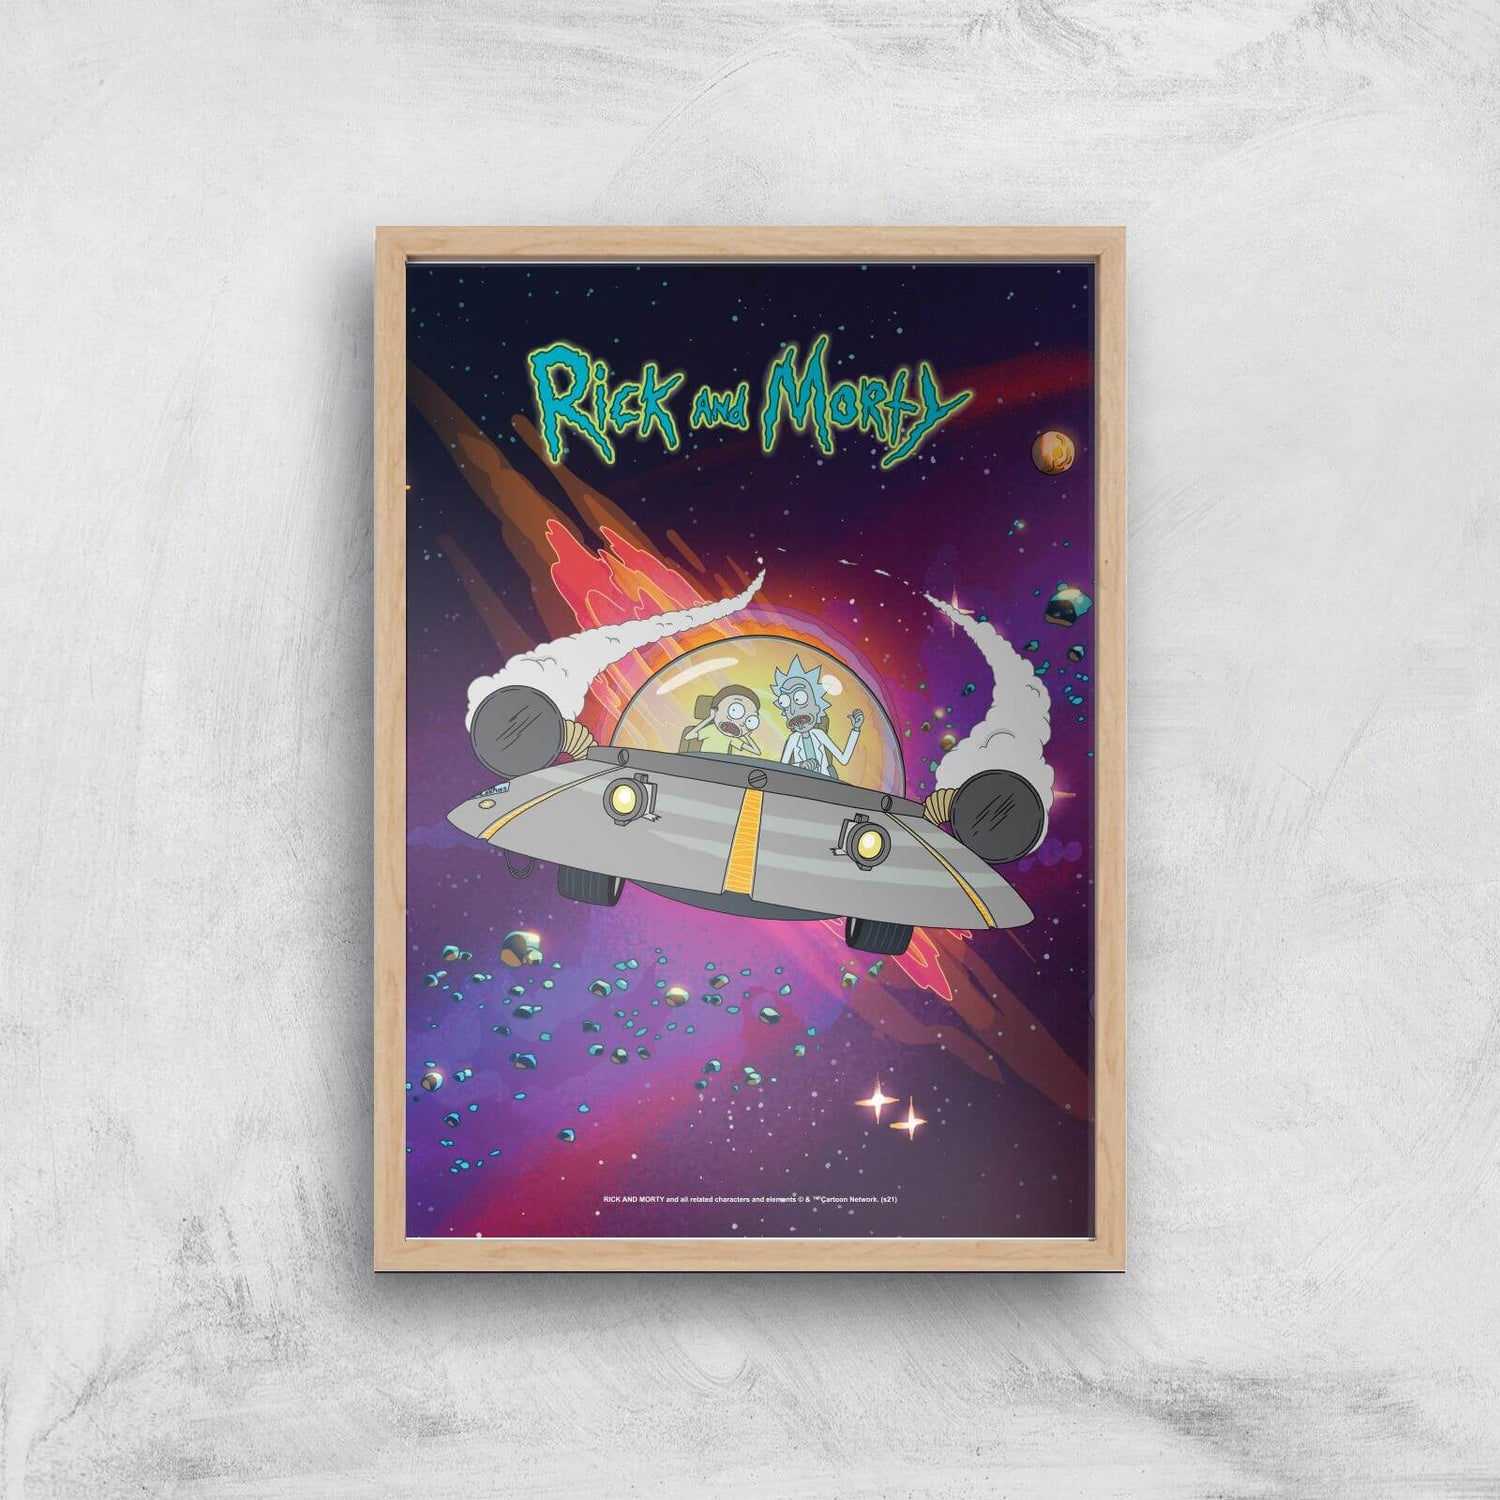 Rick and Morty Rocket Adventure Giclee Art Print - A2 - Wooden Frame